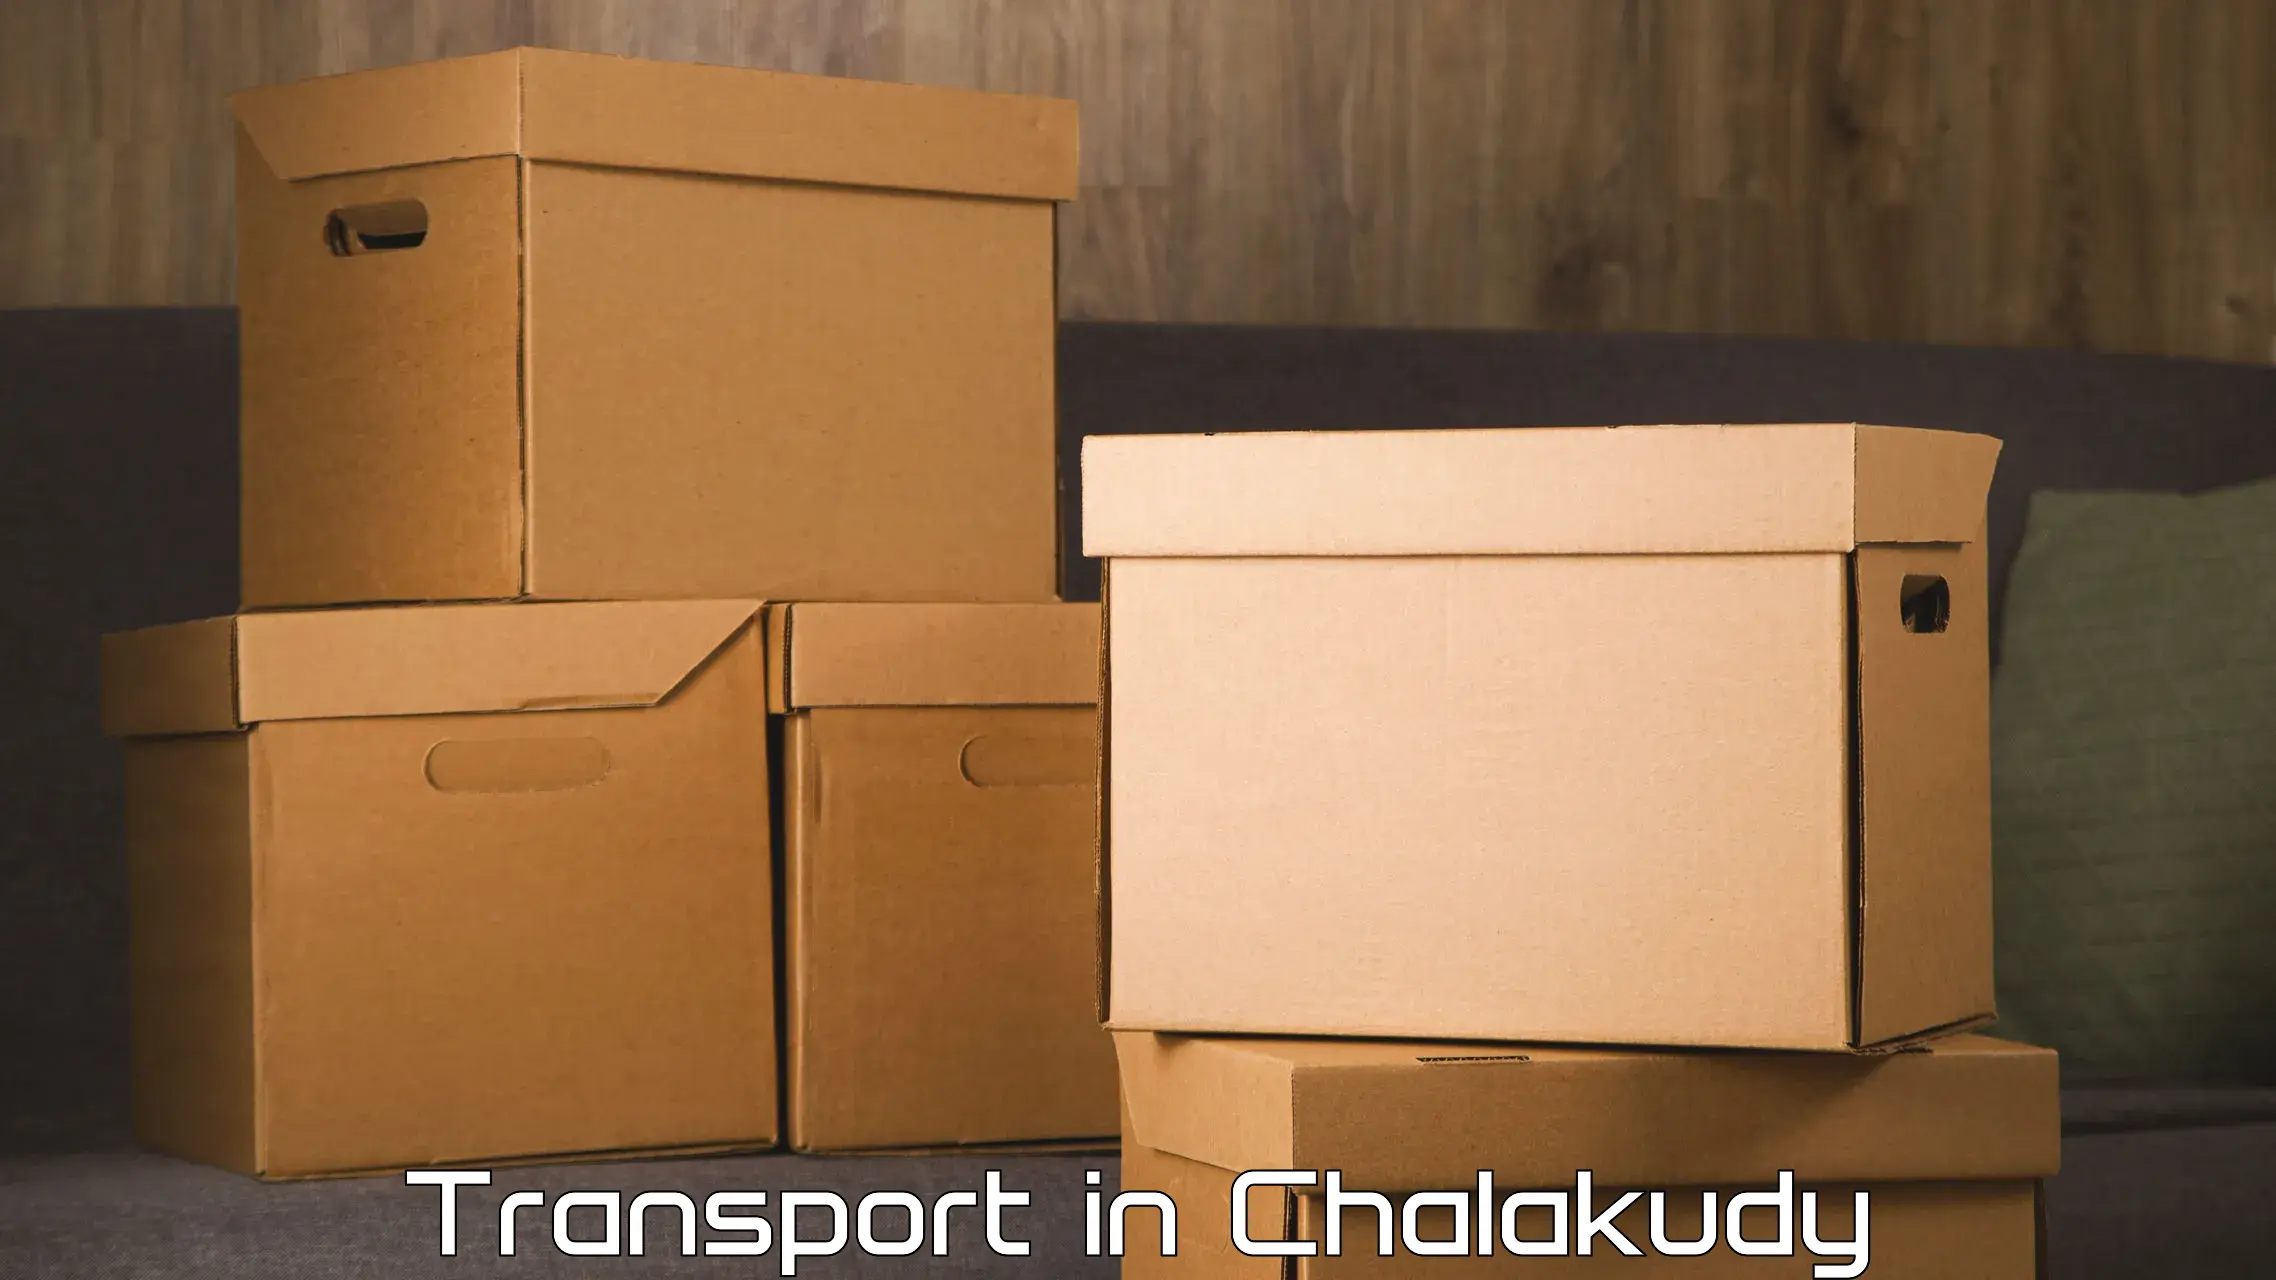 Container transportation services in Chalakudy